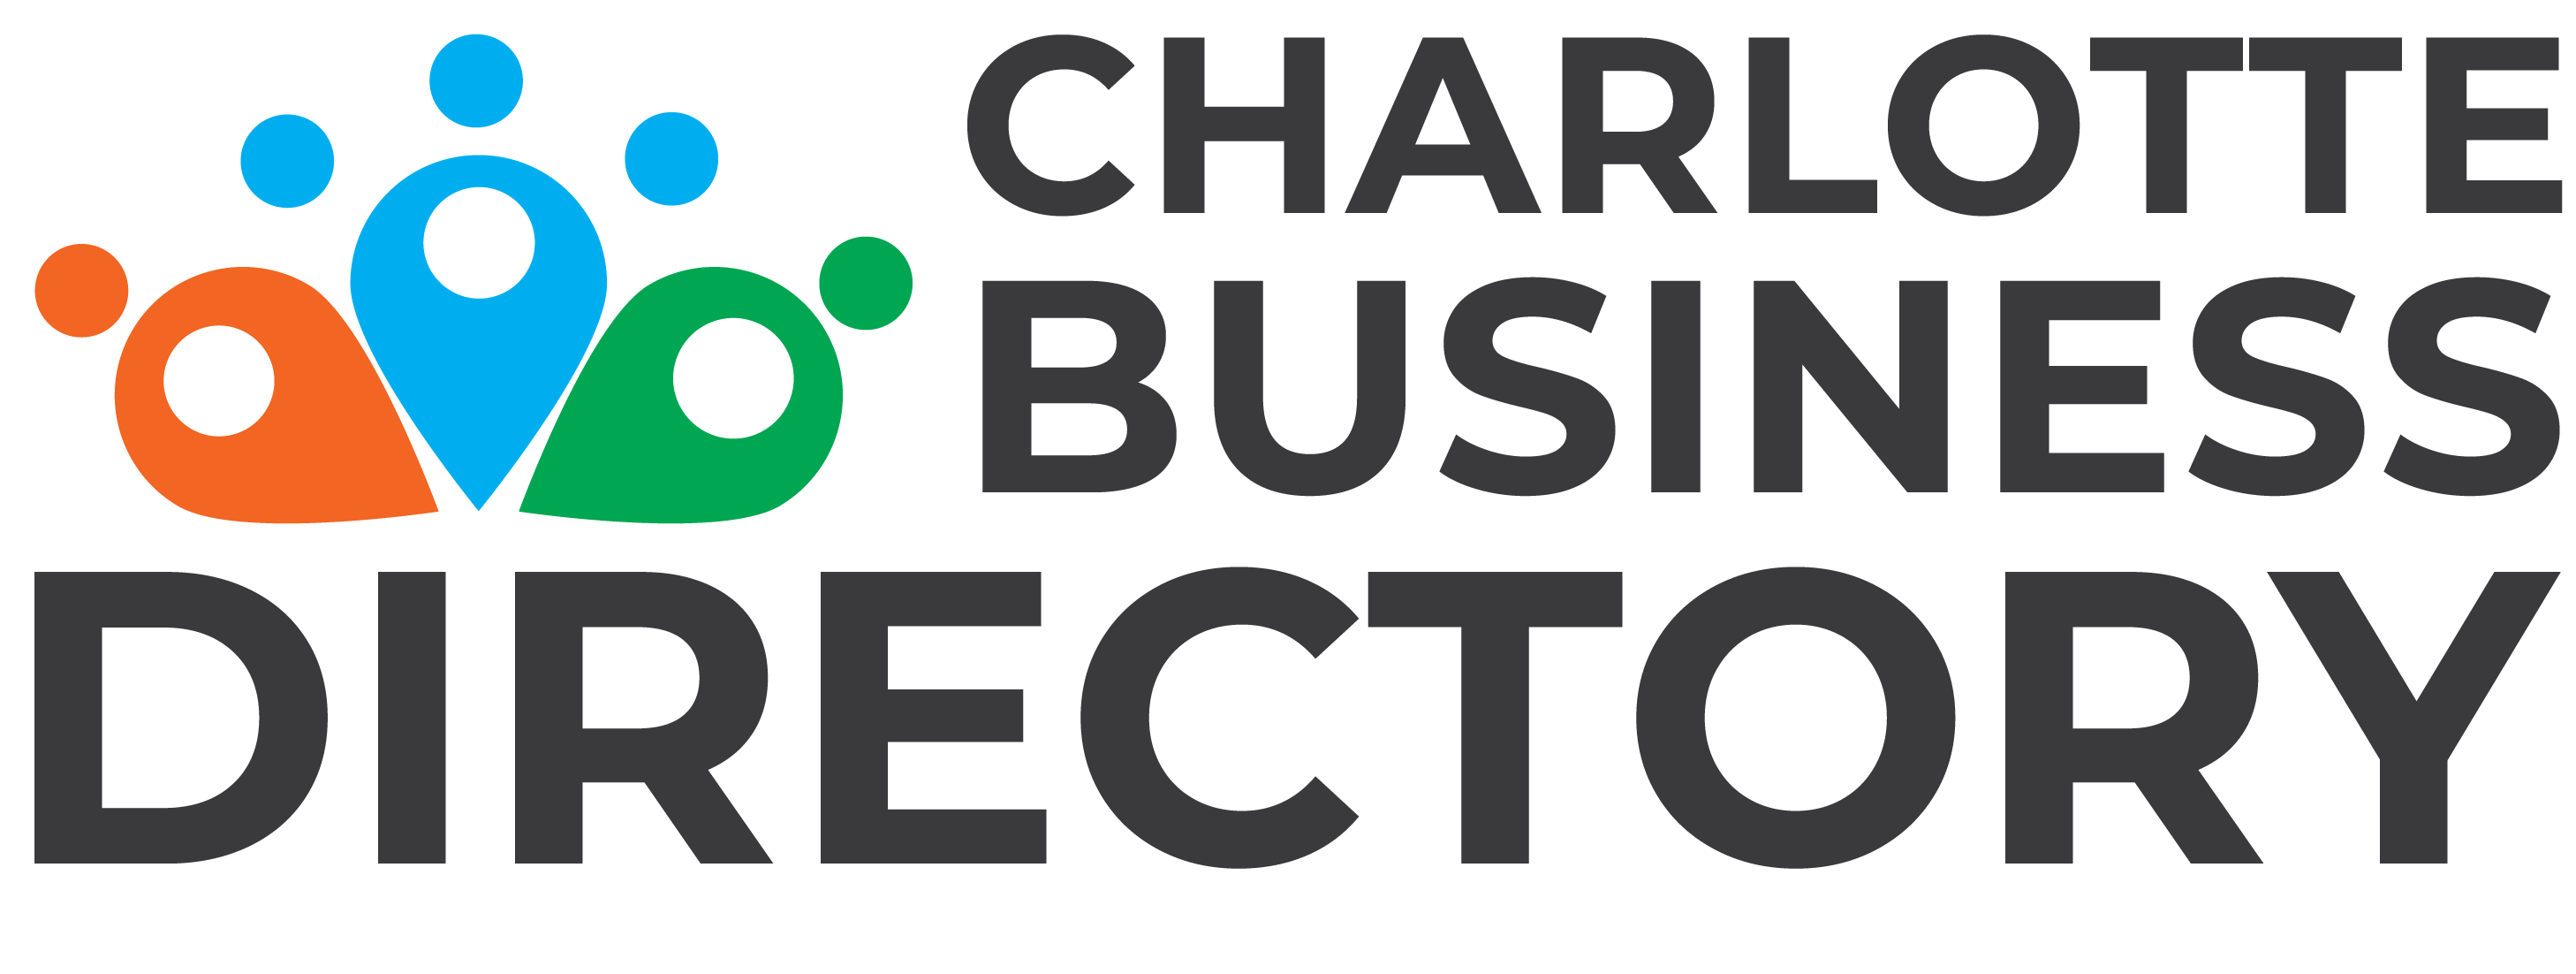 Charlotte Business Directory